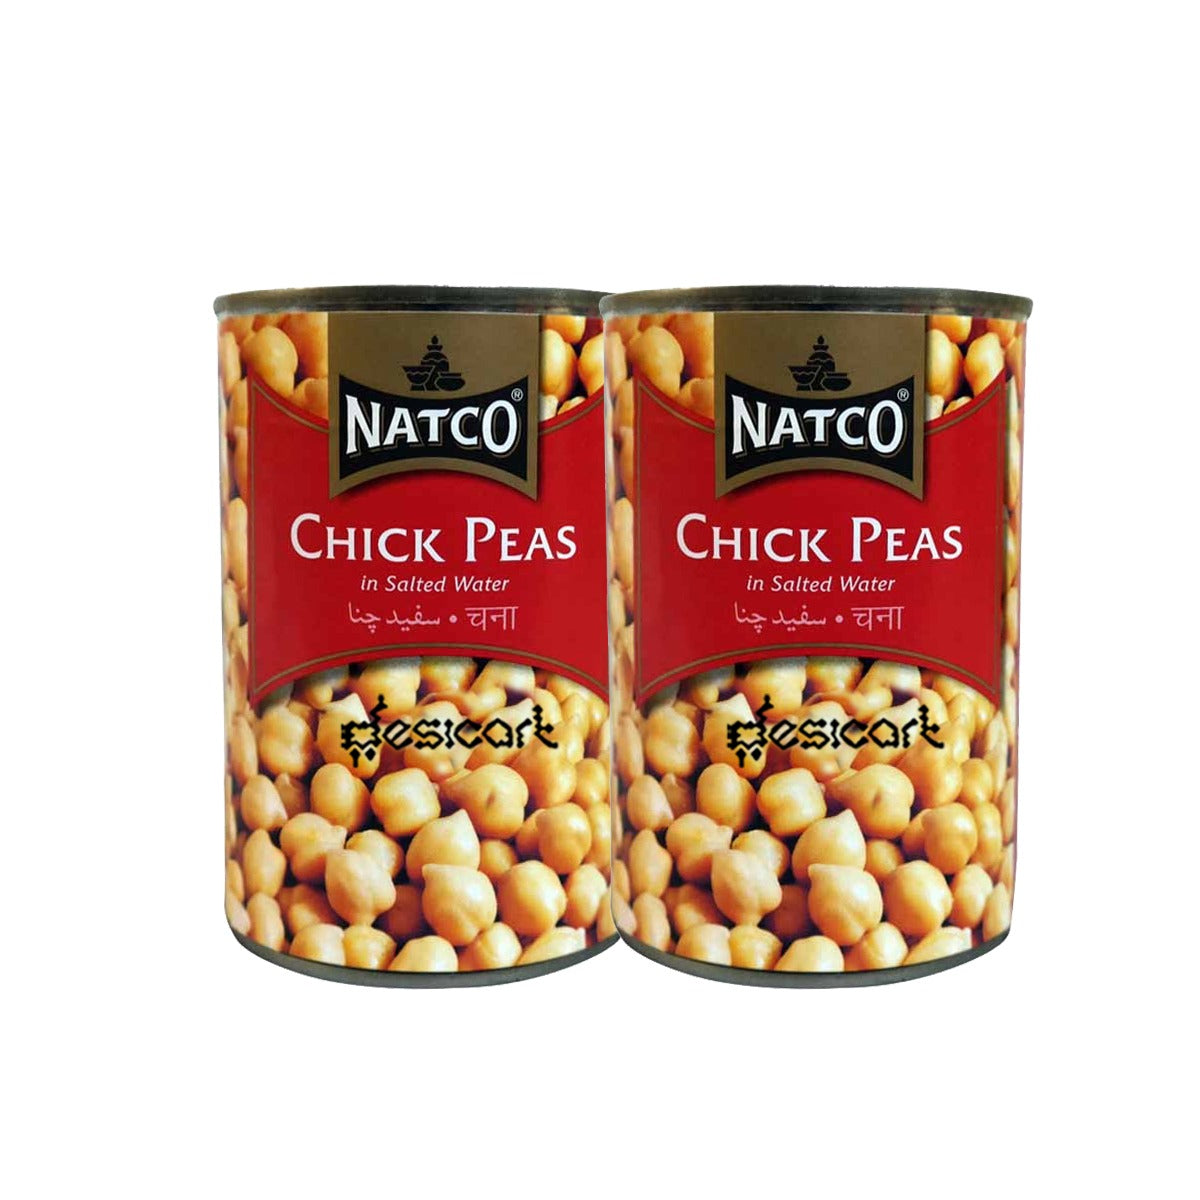 NATCO CHICK PEAS (T) (PACK OF 2) 400G